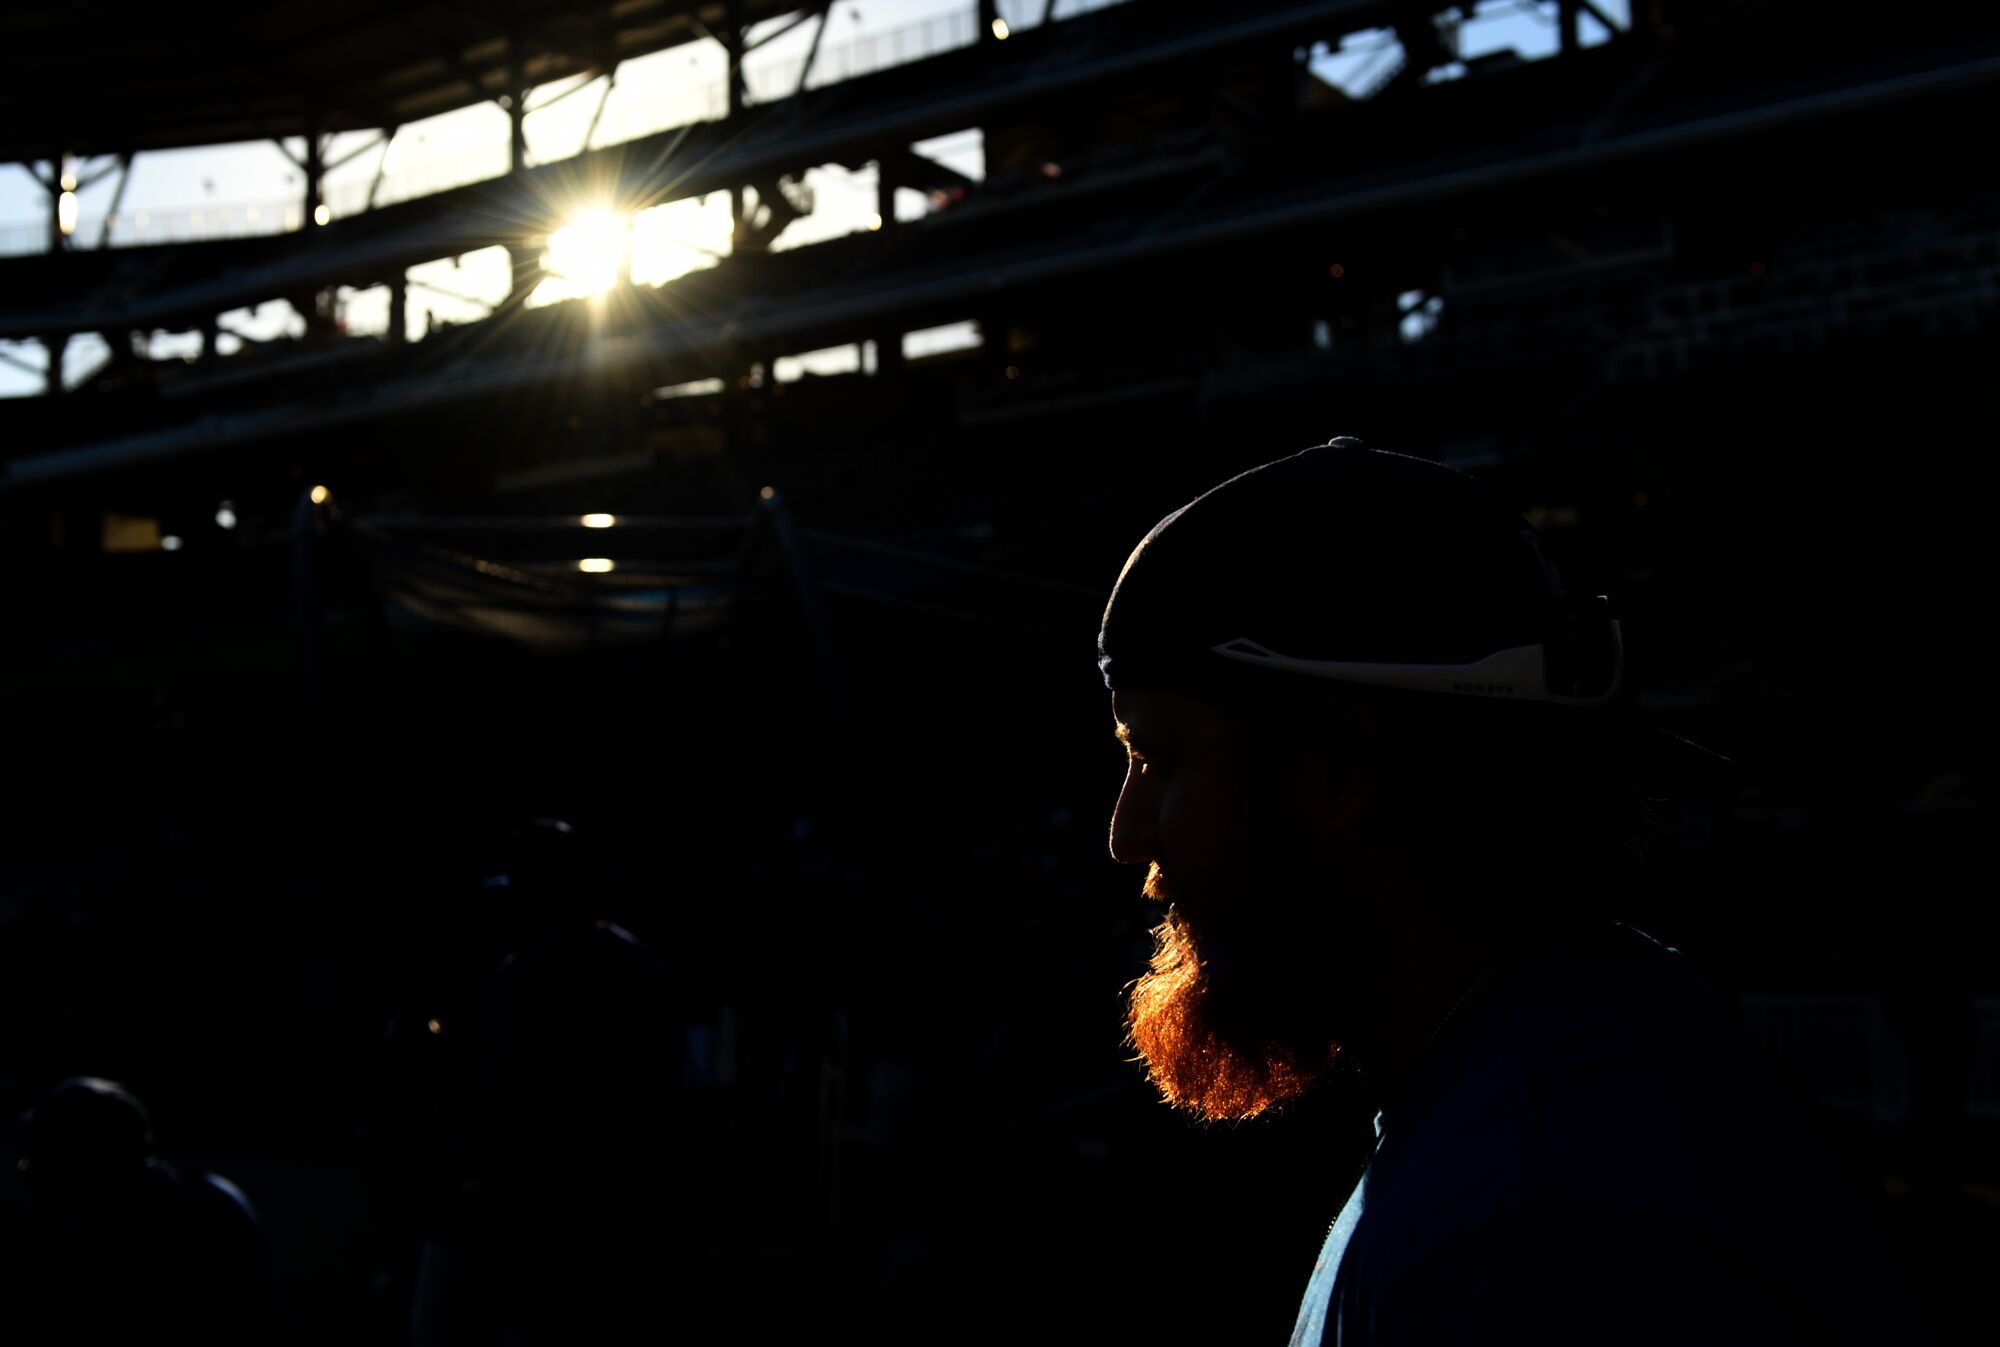 A man with a beard in a baseball hat is covered in shadow.